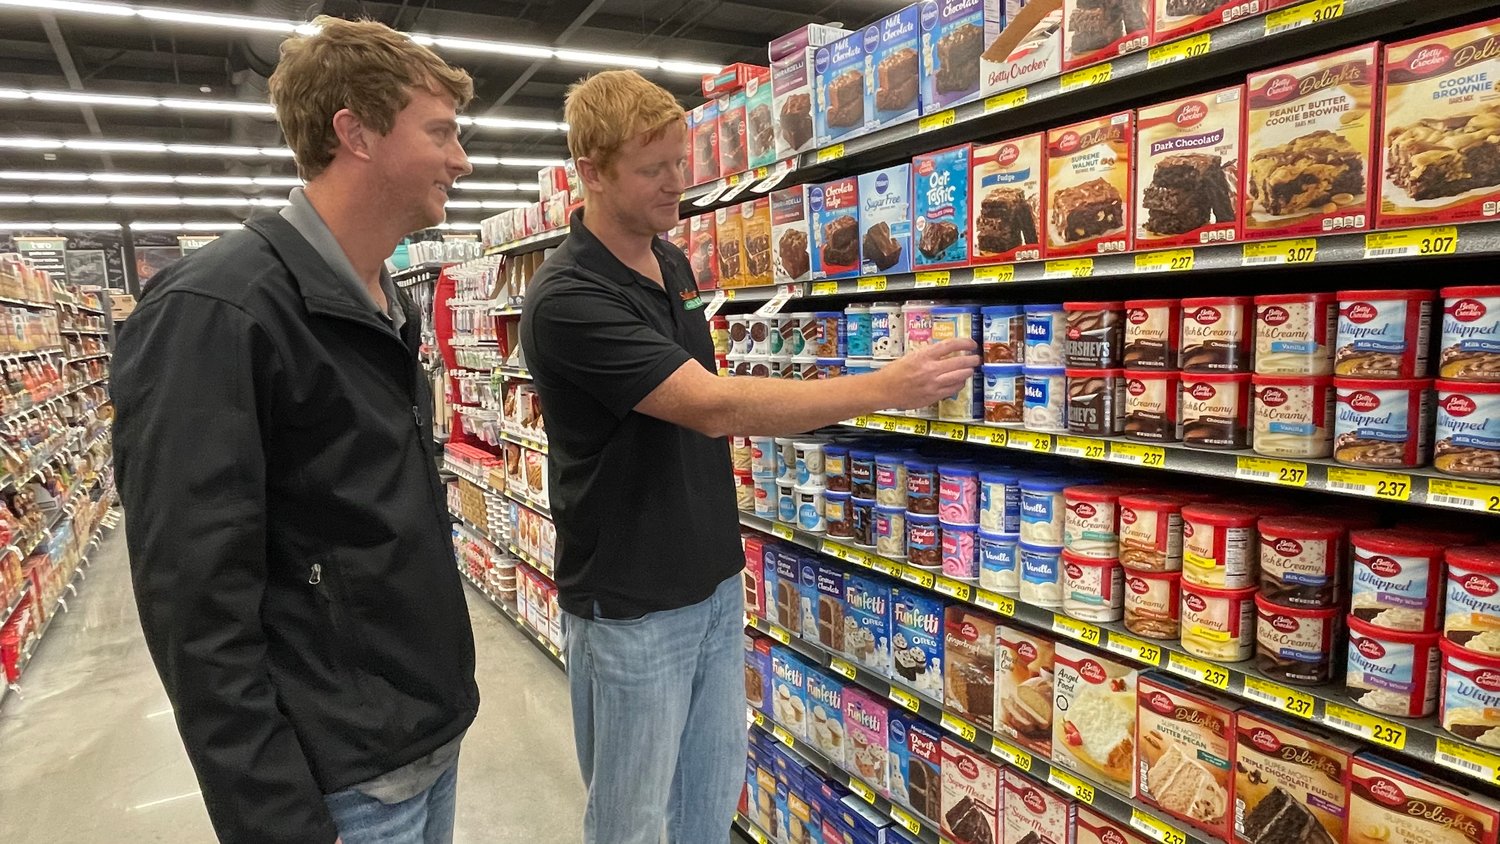 Parker and Shawn Sullivan take a tour through their new Gluckstadt store on Wednesday in advance of the April 6 soft opening.